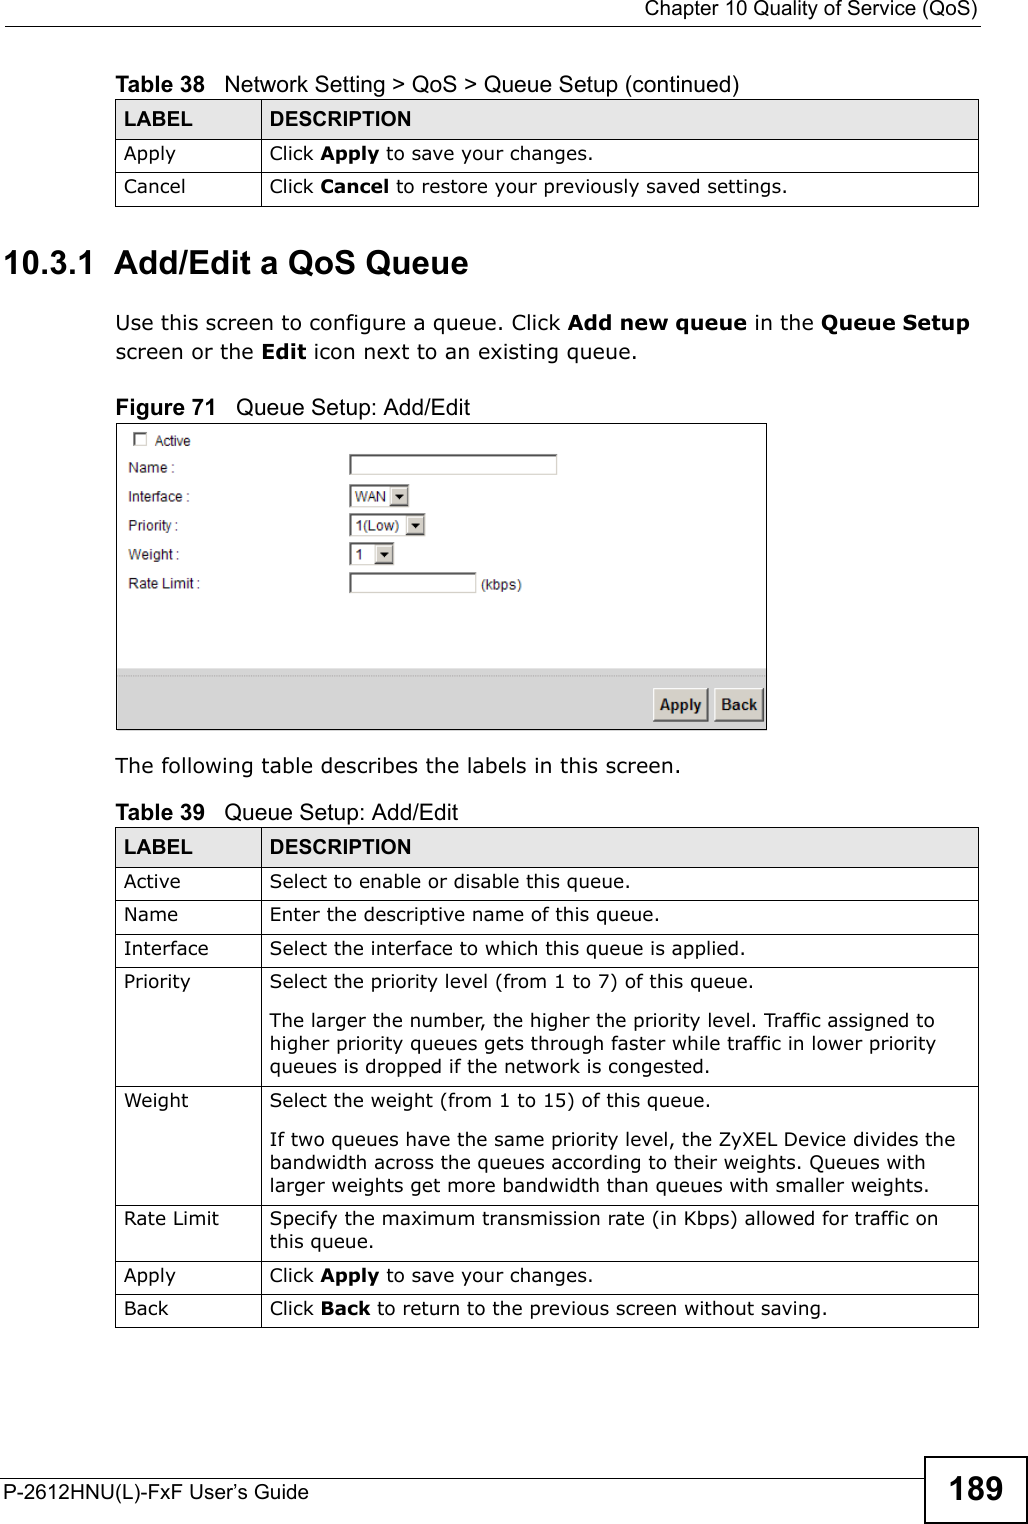  Chapter 10 Quality of Service (QoS)P-2612HNU(L)-FxF User’s Guide 18910.3.1  Add/Edit a QoS Queue Use this screen to configure a queue. Click Add new queue in the Queue Setupscreen or the Edit icon next to an existing queue.Figure 71   Queue Setup: Add/Edit The following table describes the labels in this screen. Apply Click Apply to save your changes.Cancel Click Cancel to restore your previously saved settings.Table 38   Network Setting &gt; QoS &gt; Queue Setup (continued)LABEL DESCRIPTIONTable 39   Queue Setup: Add/EditLABEL DESCRIPTIONActive Select to enable or disable this queue.Name Enter the descriptive name of this queue.Interface Select the interface to which this queue is applied.Priority Select the priority level (from 1 to 7) of this queue.The larger the number, the higher the priority level. Traffic assigned to higher priority queues gets through faster while traffic in lower priorityqueues is dropped if the network is congested.Weight Select the weight (from 1 to 15) of this queue.If two queues have the same priority level, the ZyXEL Device divides the bandwidth across the queues according to their weights. Queues with larger weights get more bandwidth than queues with smaller weights.Rate Limit Specify the maximum transmission rate (in Kbps) allowed for traffic on this queue.Apply Click Apply to save your changes.Back Click Back to return to the previous screen without saving.